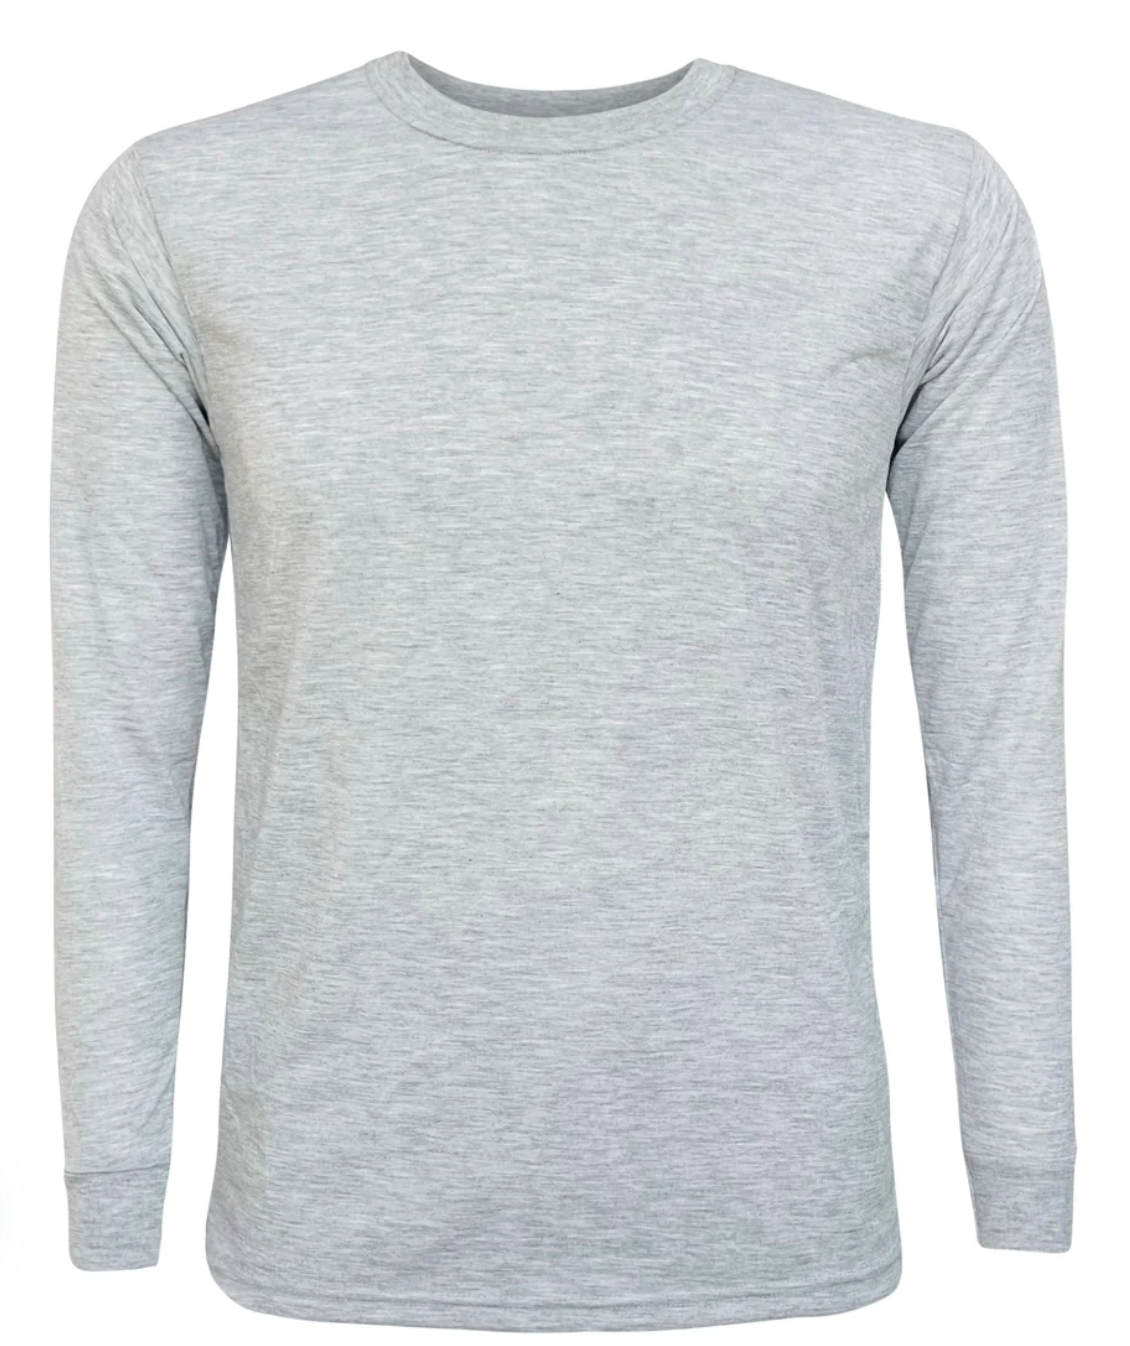 Polyester Adult Unisex Long Sleeve Shirt- Perfect for Sublimation